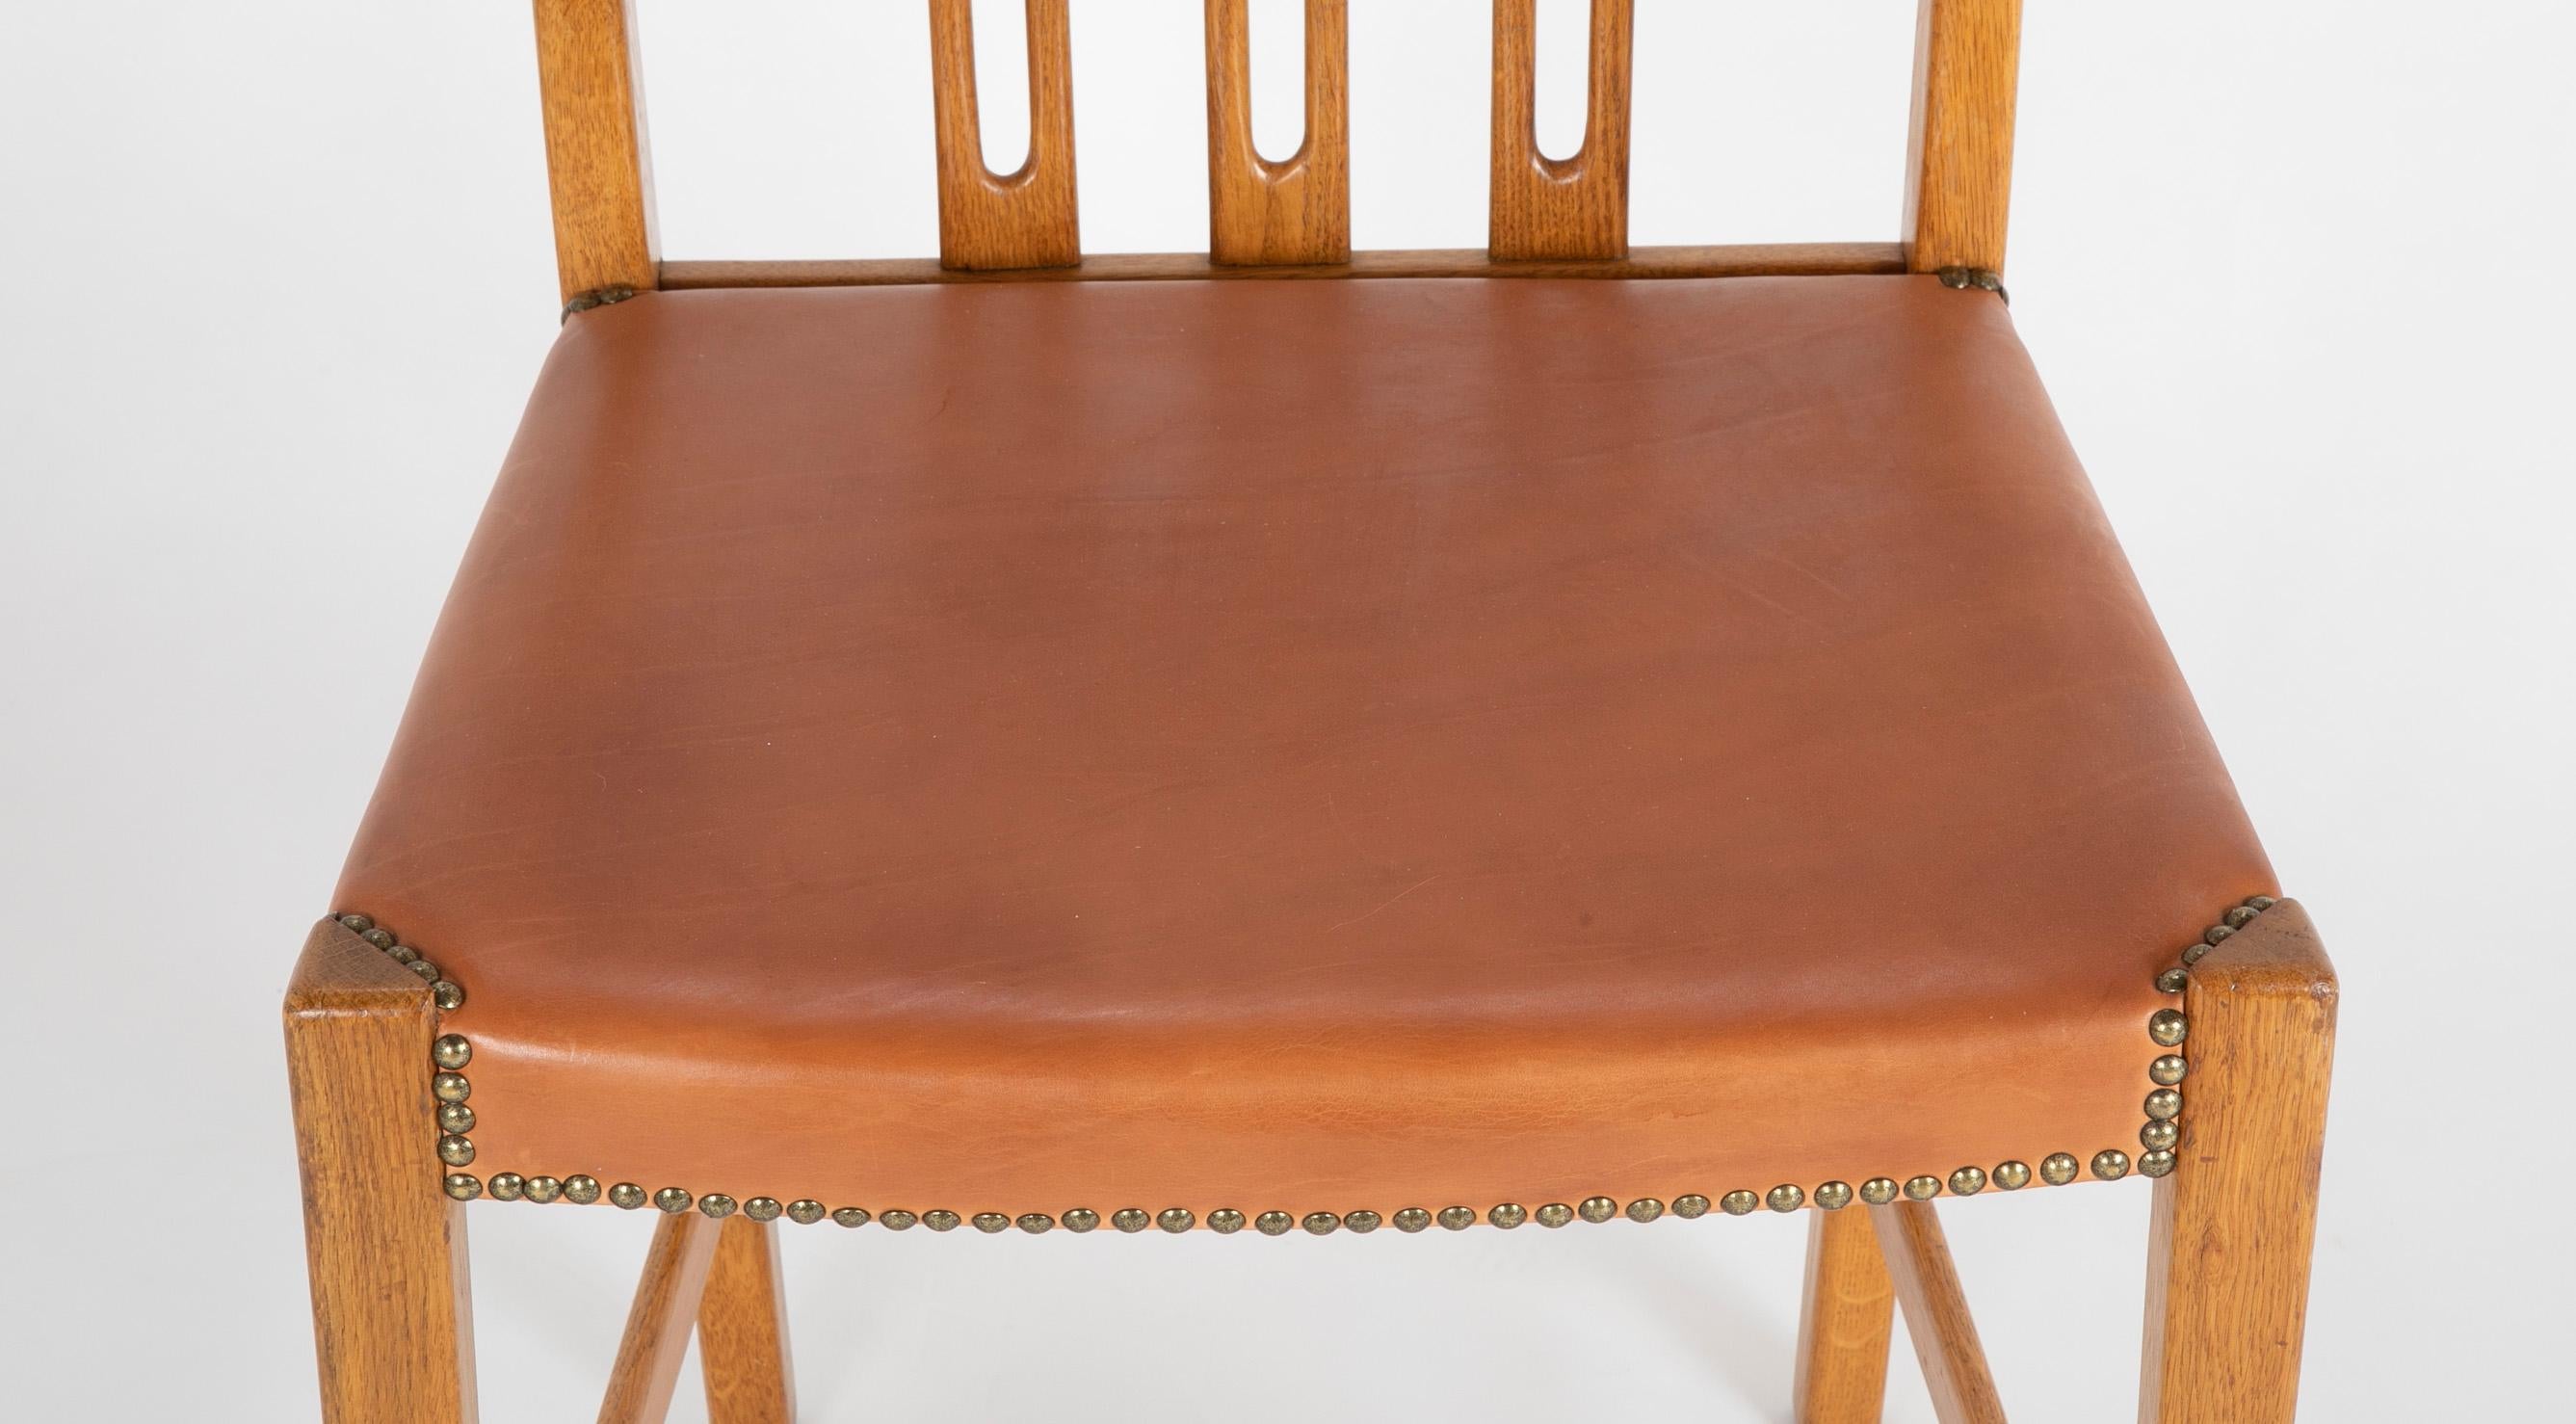 Bleached Set of 8 Dining Chairs with Leather Seats by Hans Wegner & Mikael Laursen